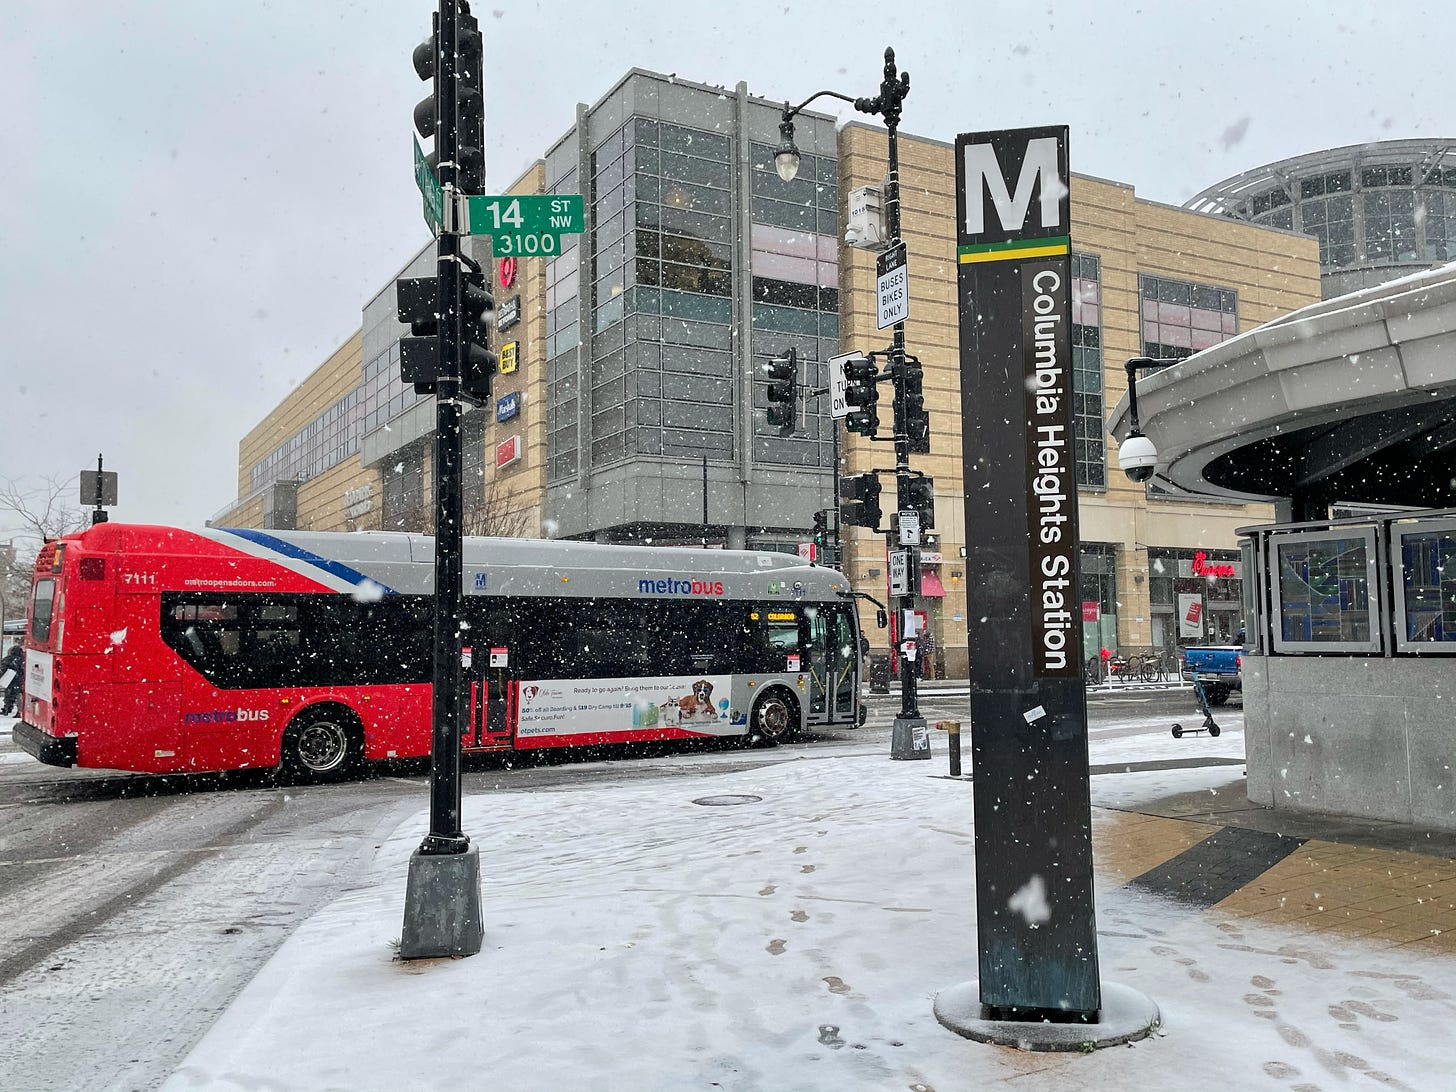 Metrobus travelling north along 14th Street NW passing Columbia Heights Metro Station in the snow